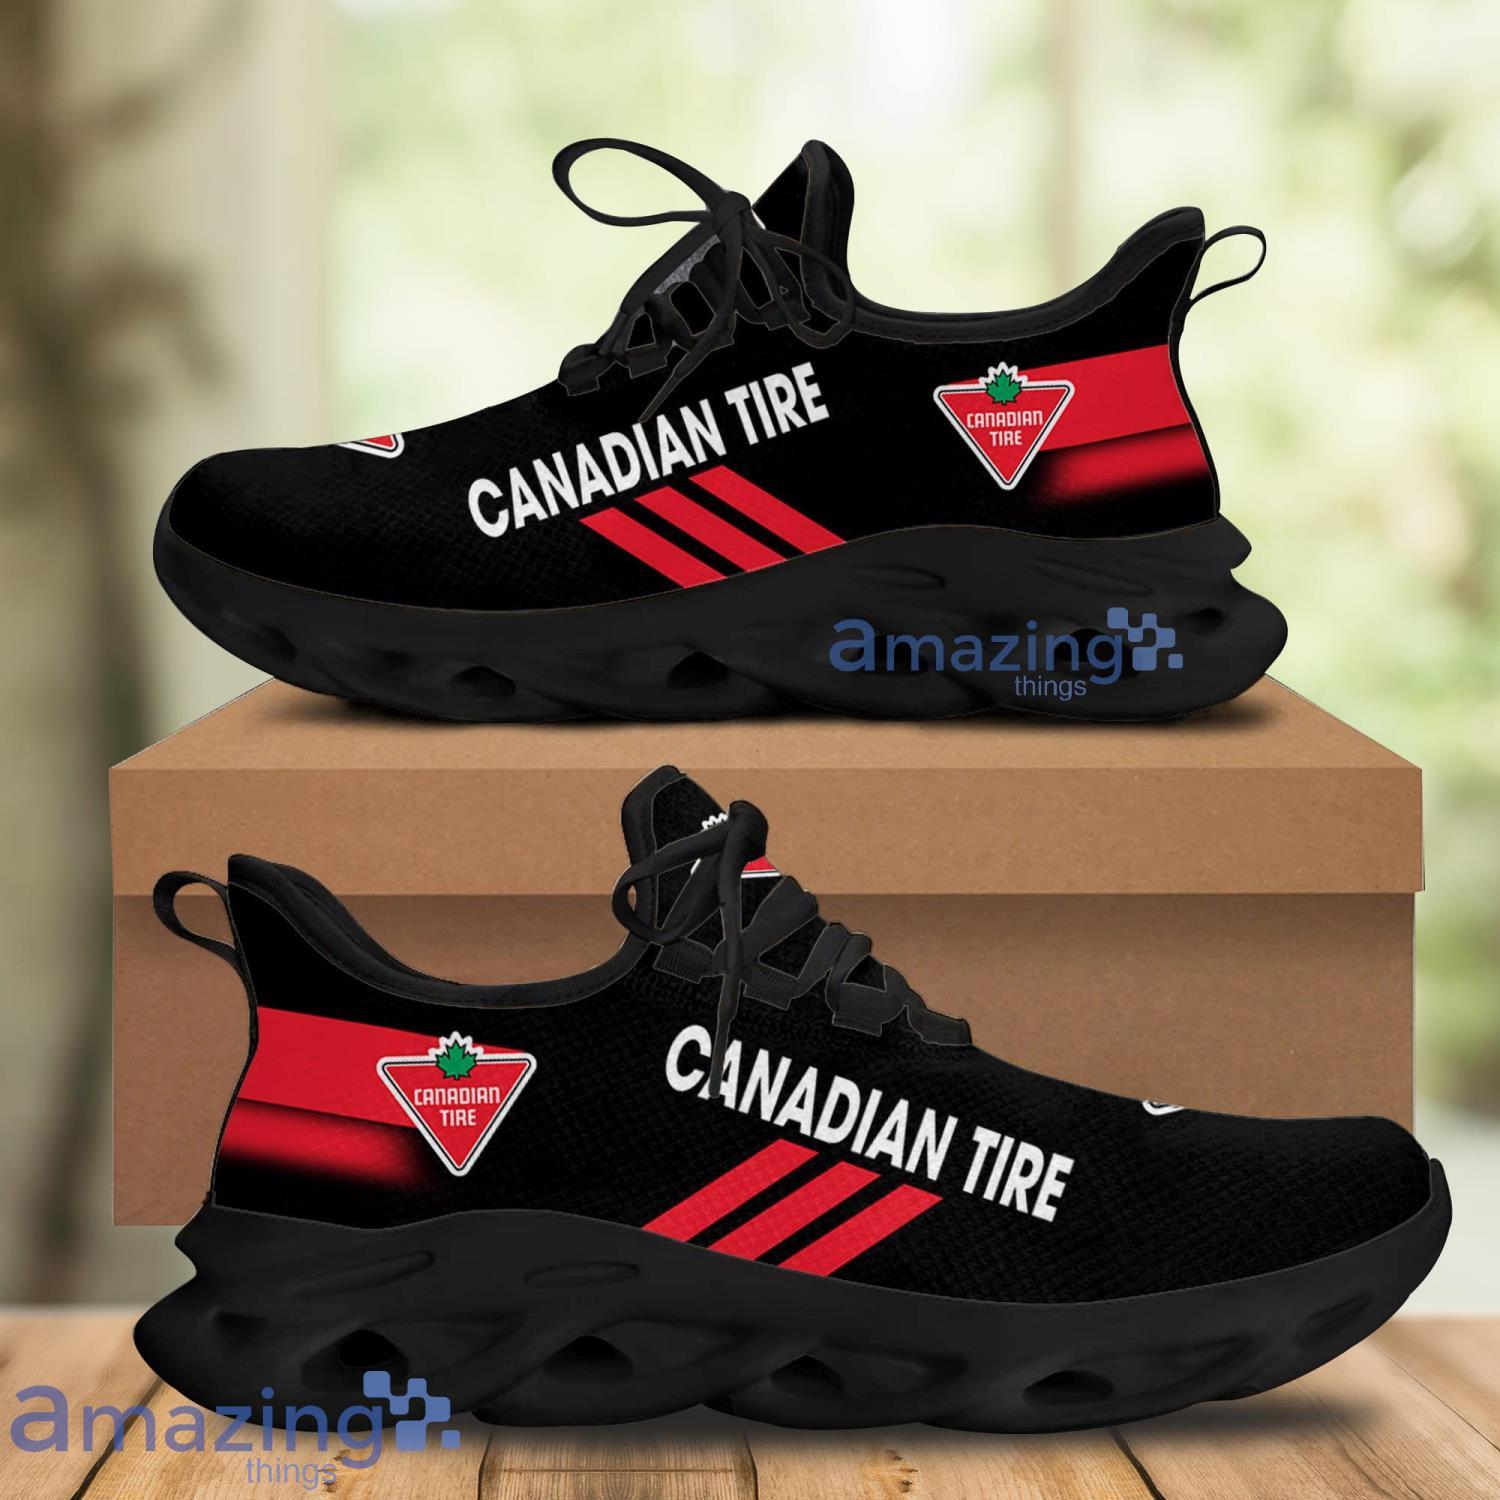 Canadian Tire Max Soul Shoes Striped Sneaker For Sport Fans Product Photo 1